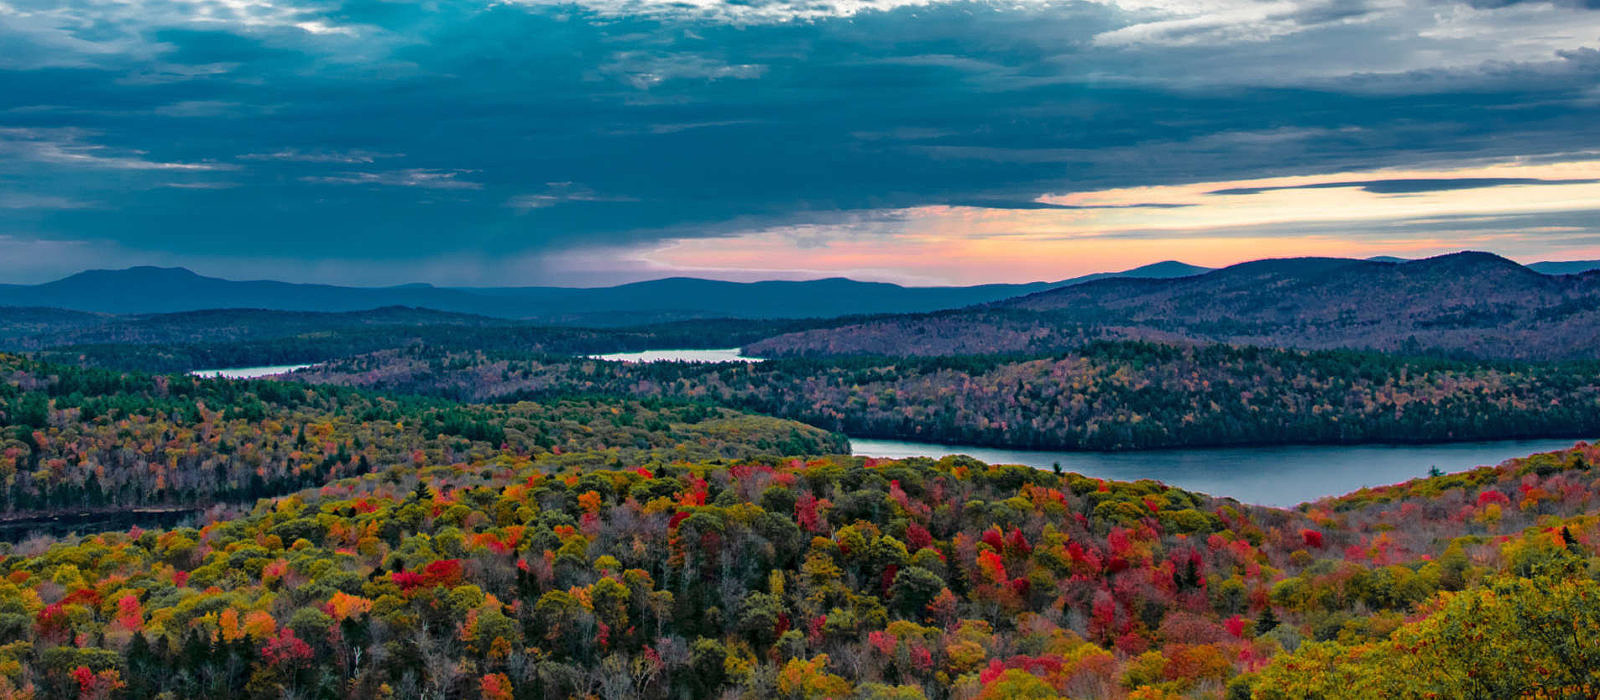 A panormaic view of Spoonwood Pond, Lake Nubanusit, and surrounding woods in brilliant fall color, as seen from the Kulish Ledges Trail. (photo © Will Kindler)